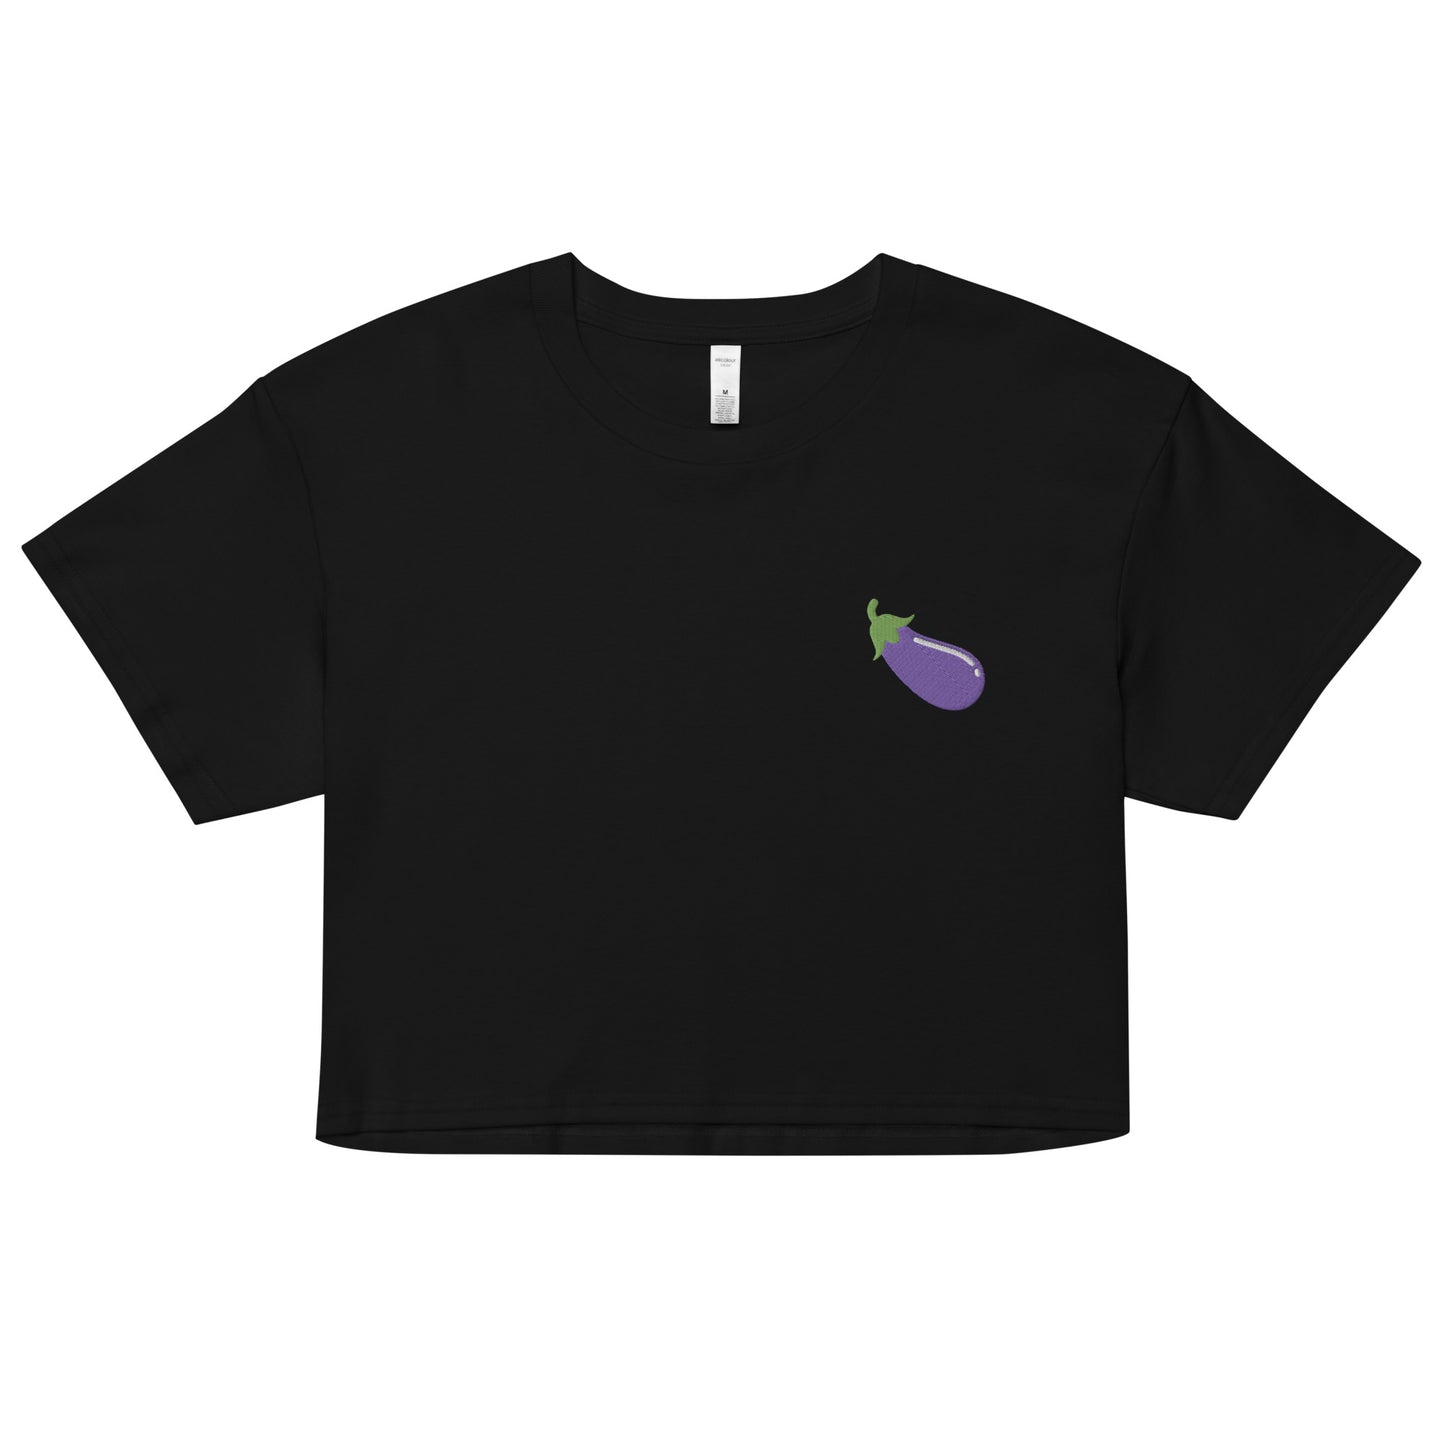 A relaxed black crop top features a modest crop and subtle eggplant embroidered design, adding a touch of mischief to your look—a playful celebration of gay culture! Made from 100% combed cotton. Available in Extra Small, Small, Medium, Large, Extra Large.